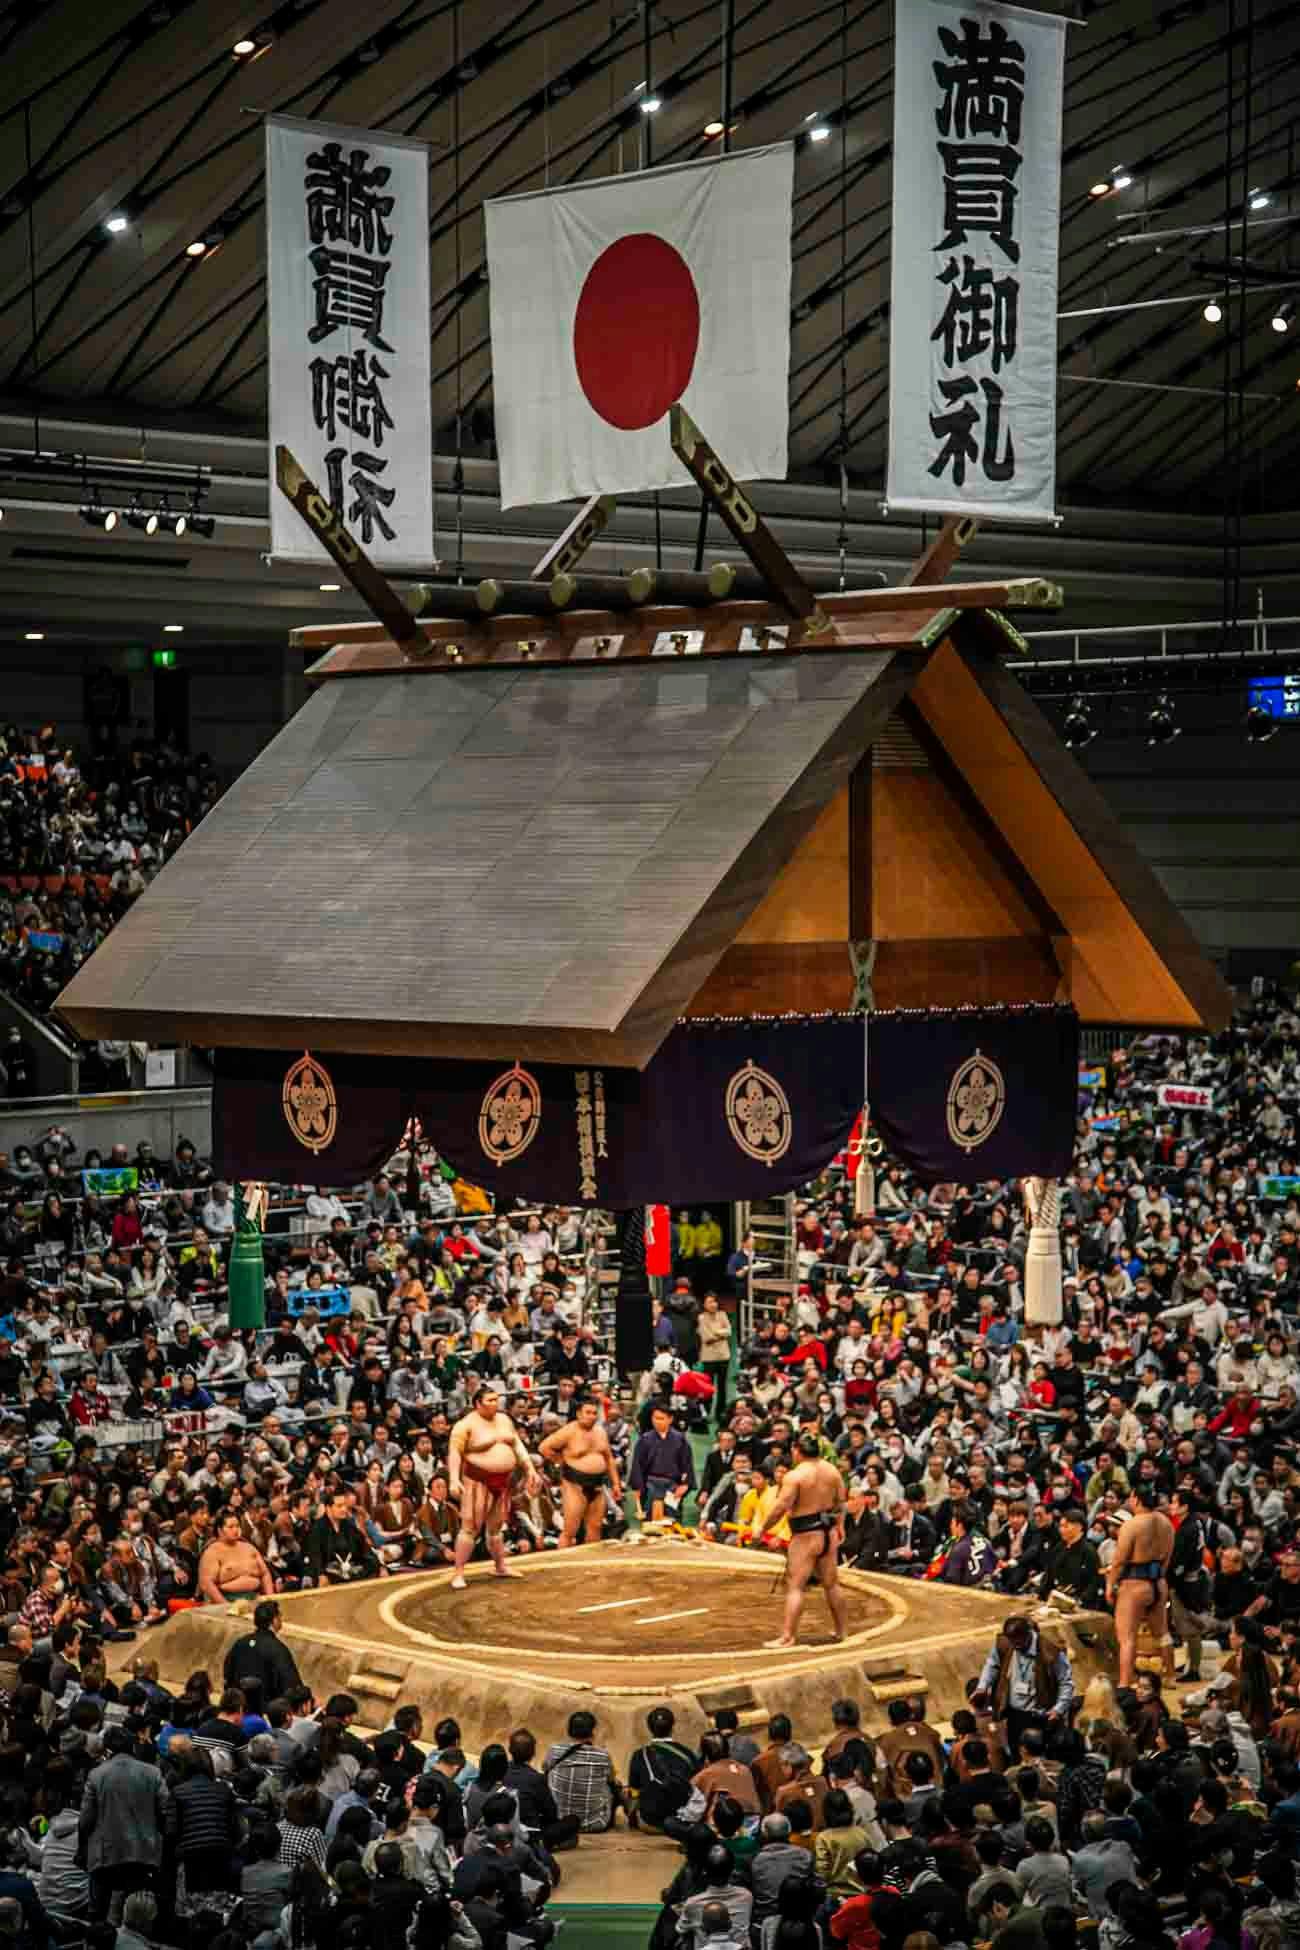 The dohyo sits in the center of the stadium. Photo source: James Saunders-Wyndham